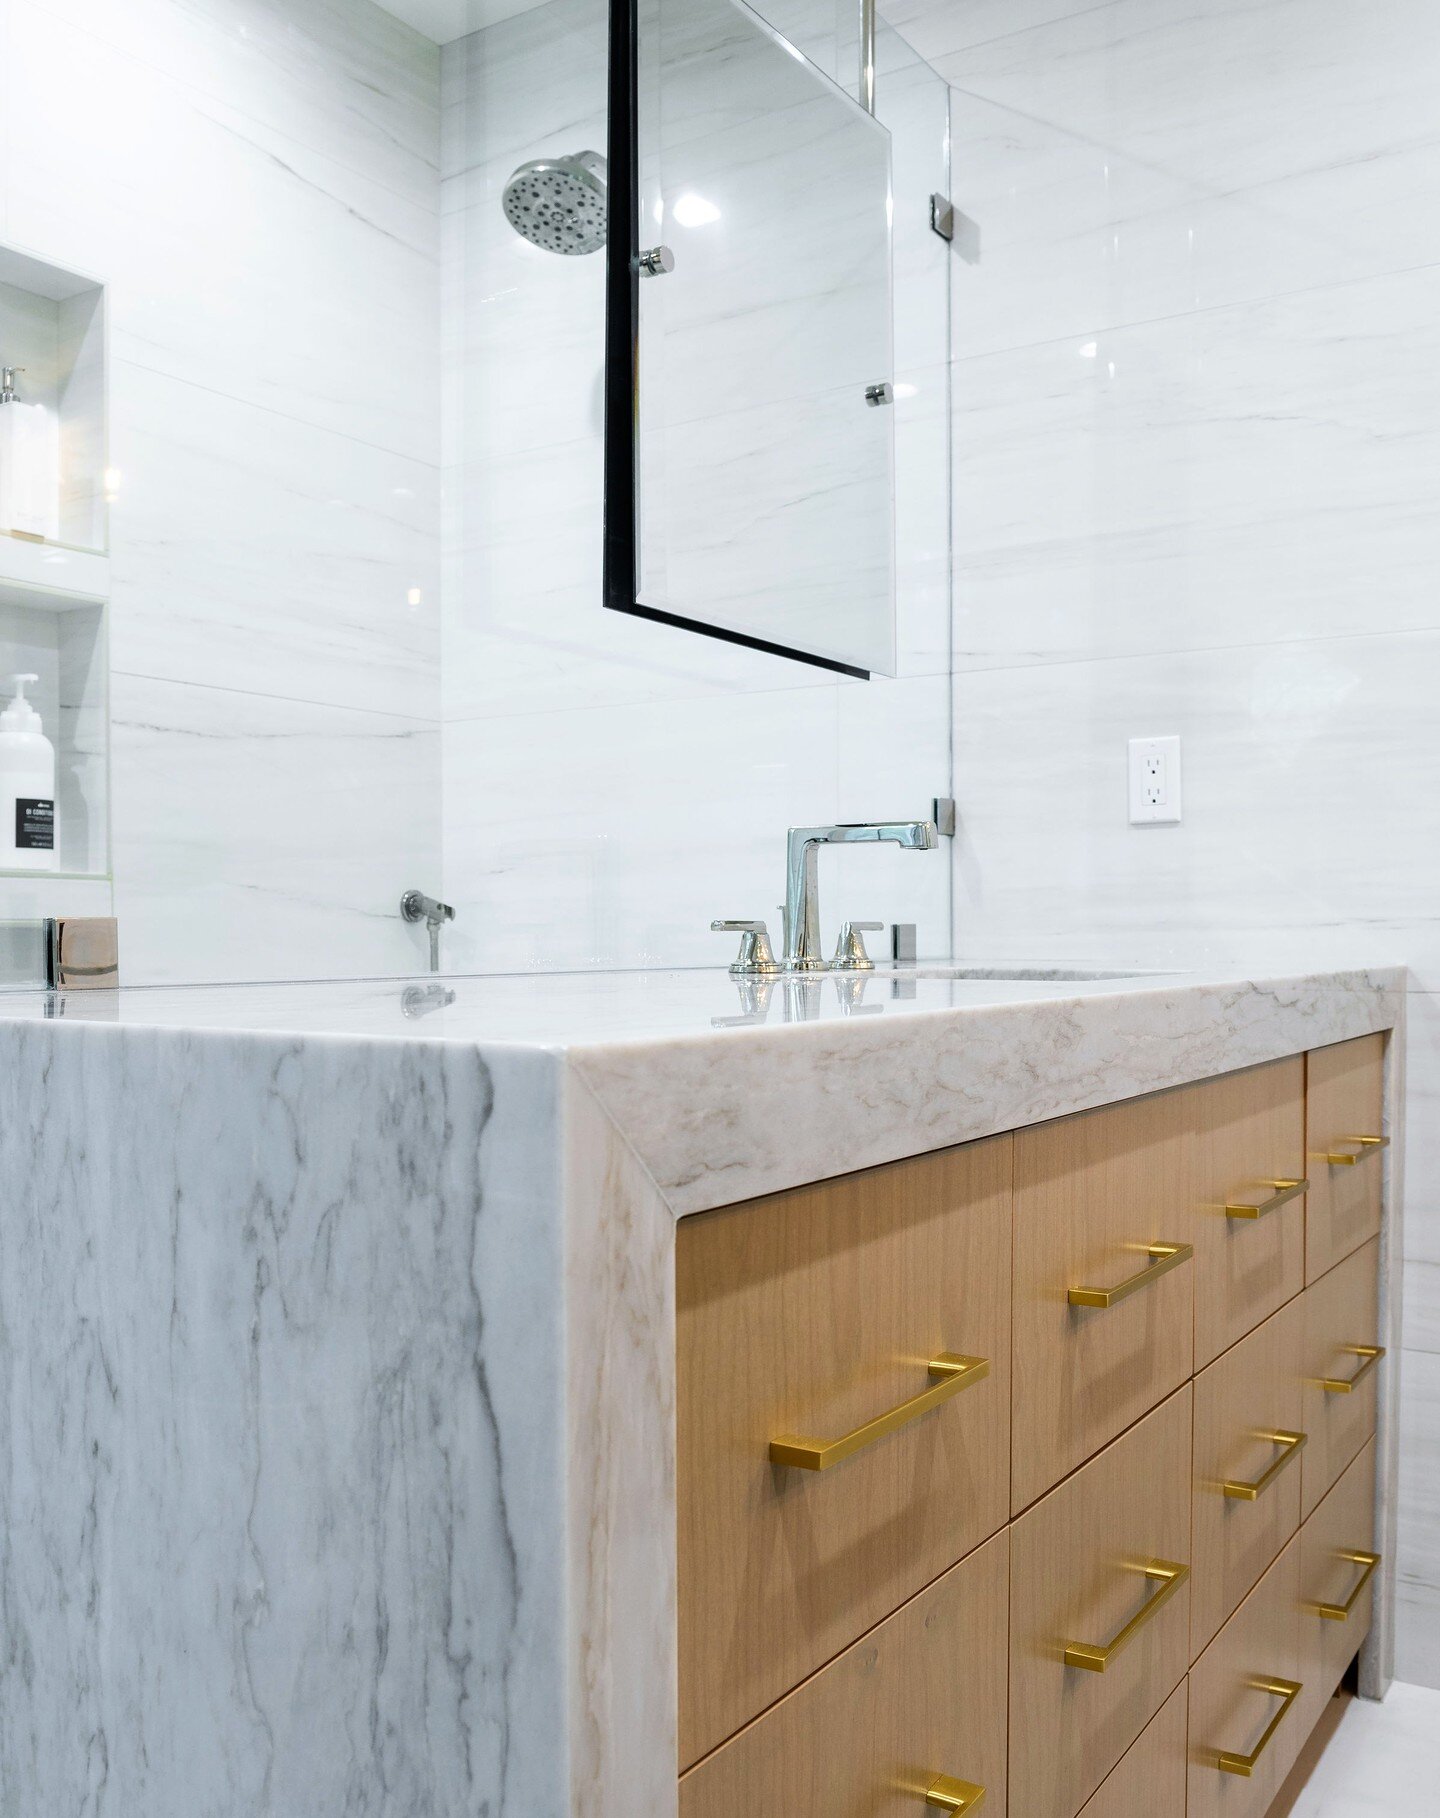 We are HUGE fans of thicker counter fronts and waterfall sides in your bathroom, especially when the stone is meant to be shown off! #bathroomdesign #bathroomremodel #bainbridgeisland #kitsap